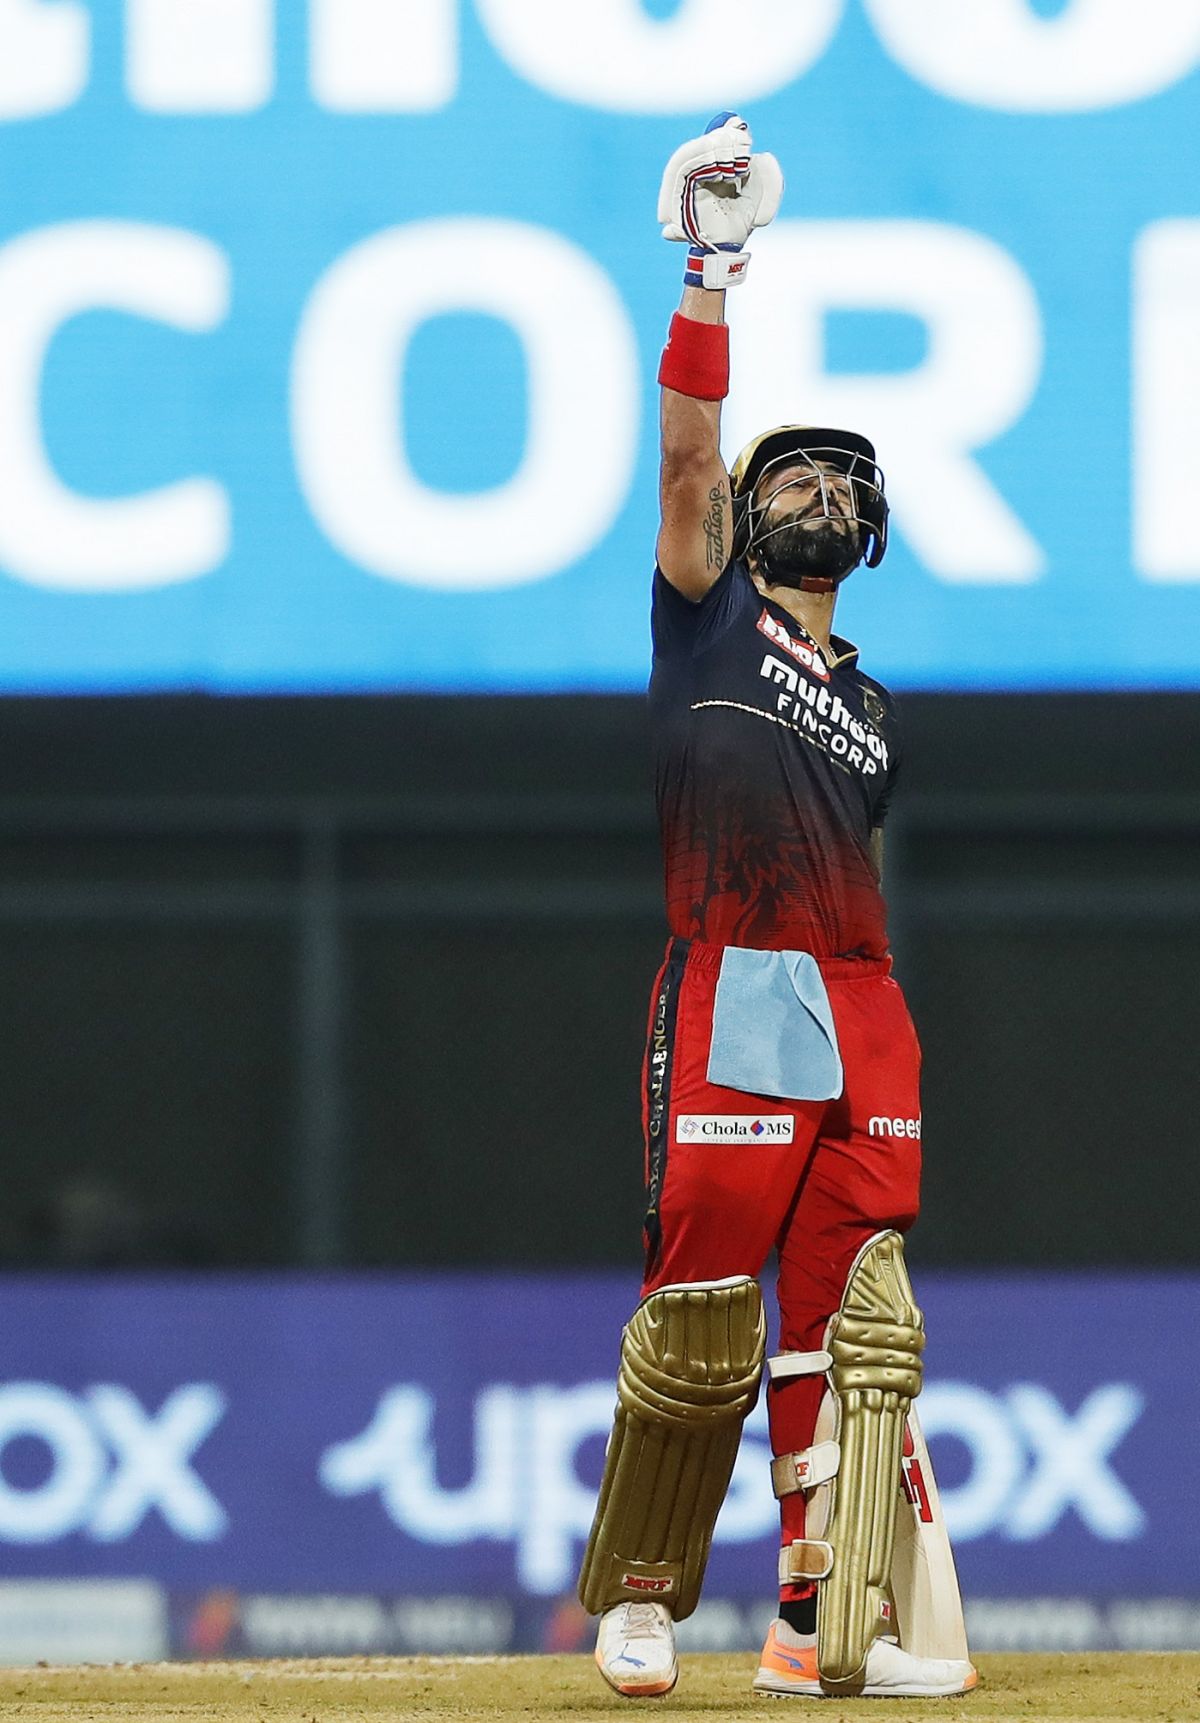 Virat Kohli makes it known how important the half-century was by gesturing  towards the sky 